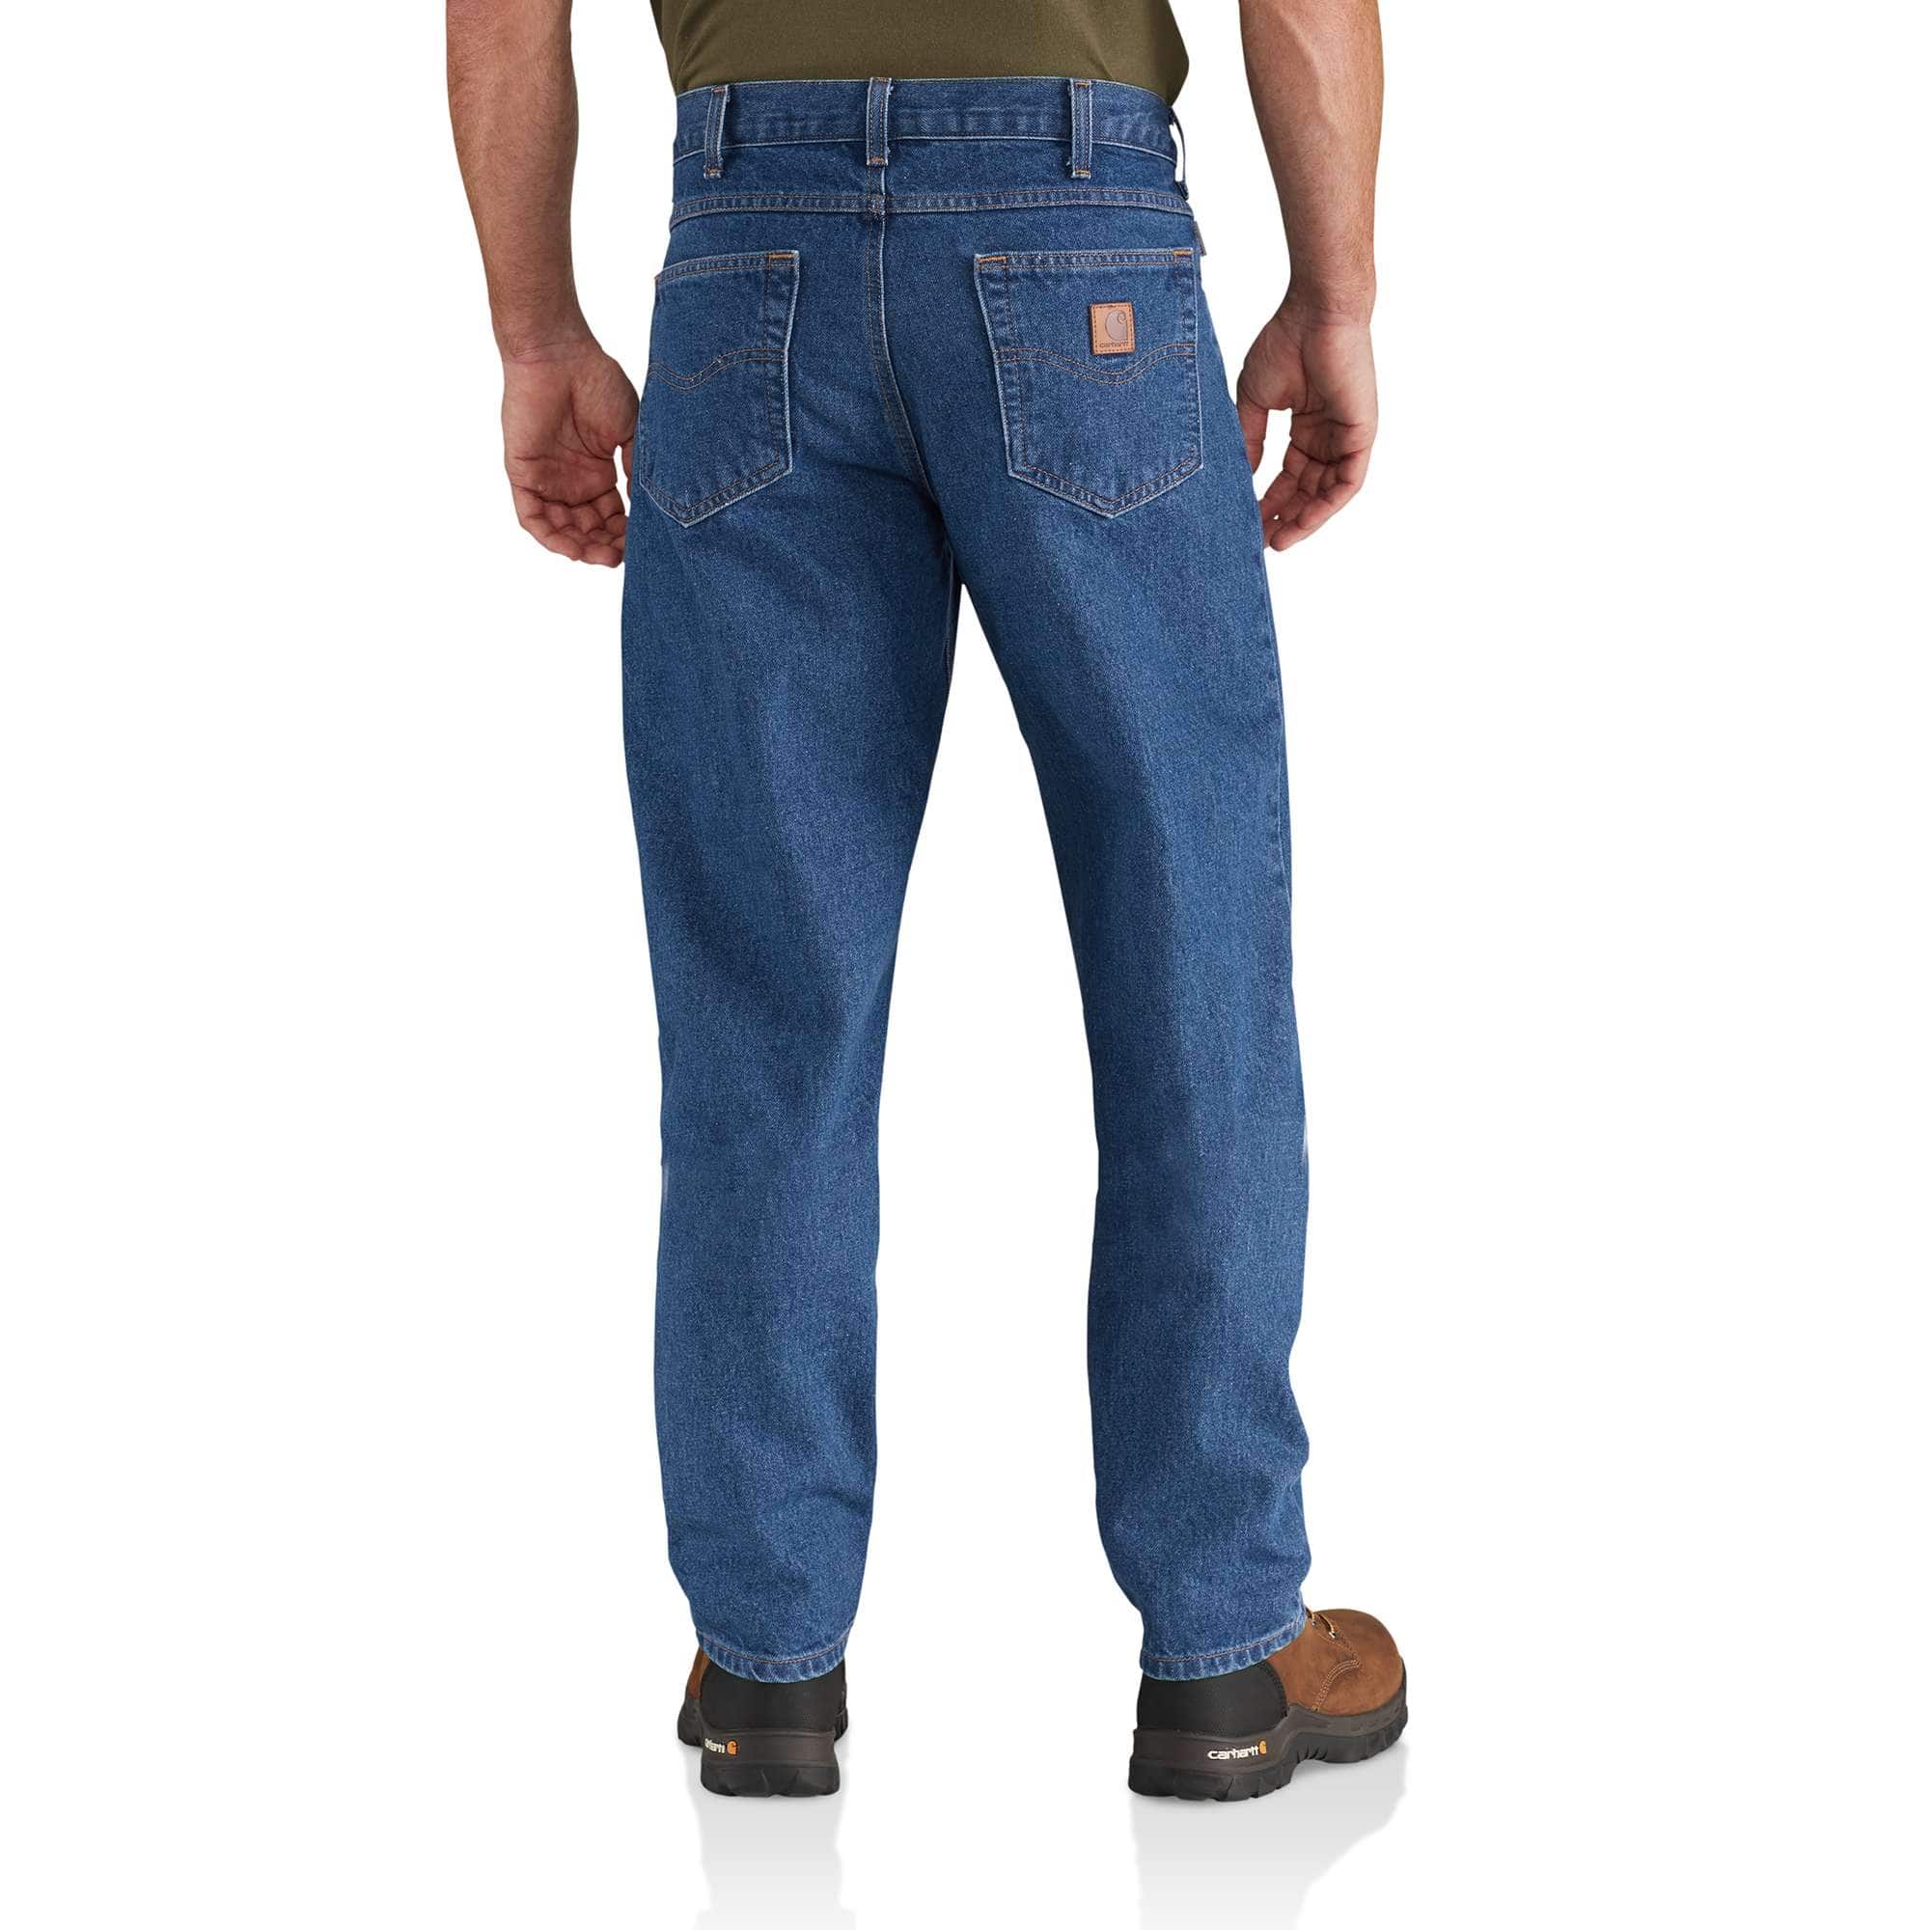 Men's Relaxed Fit Tapered Leg Jean B17 